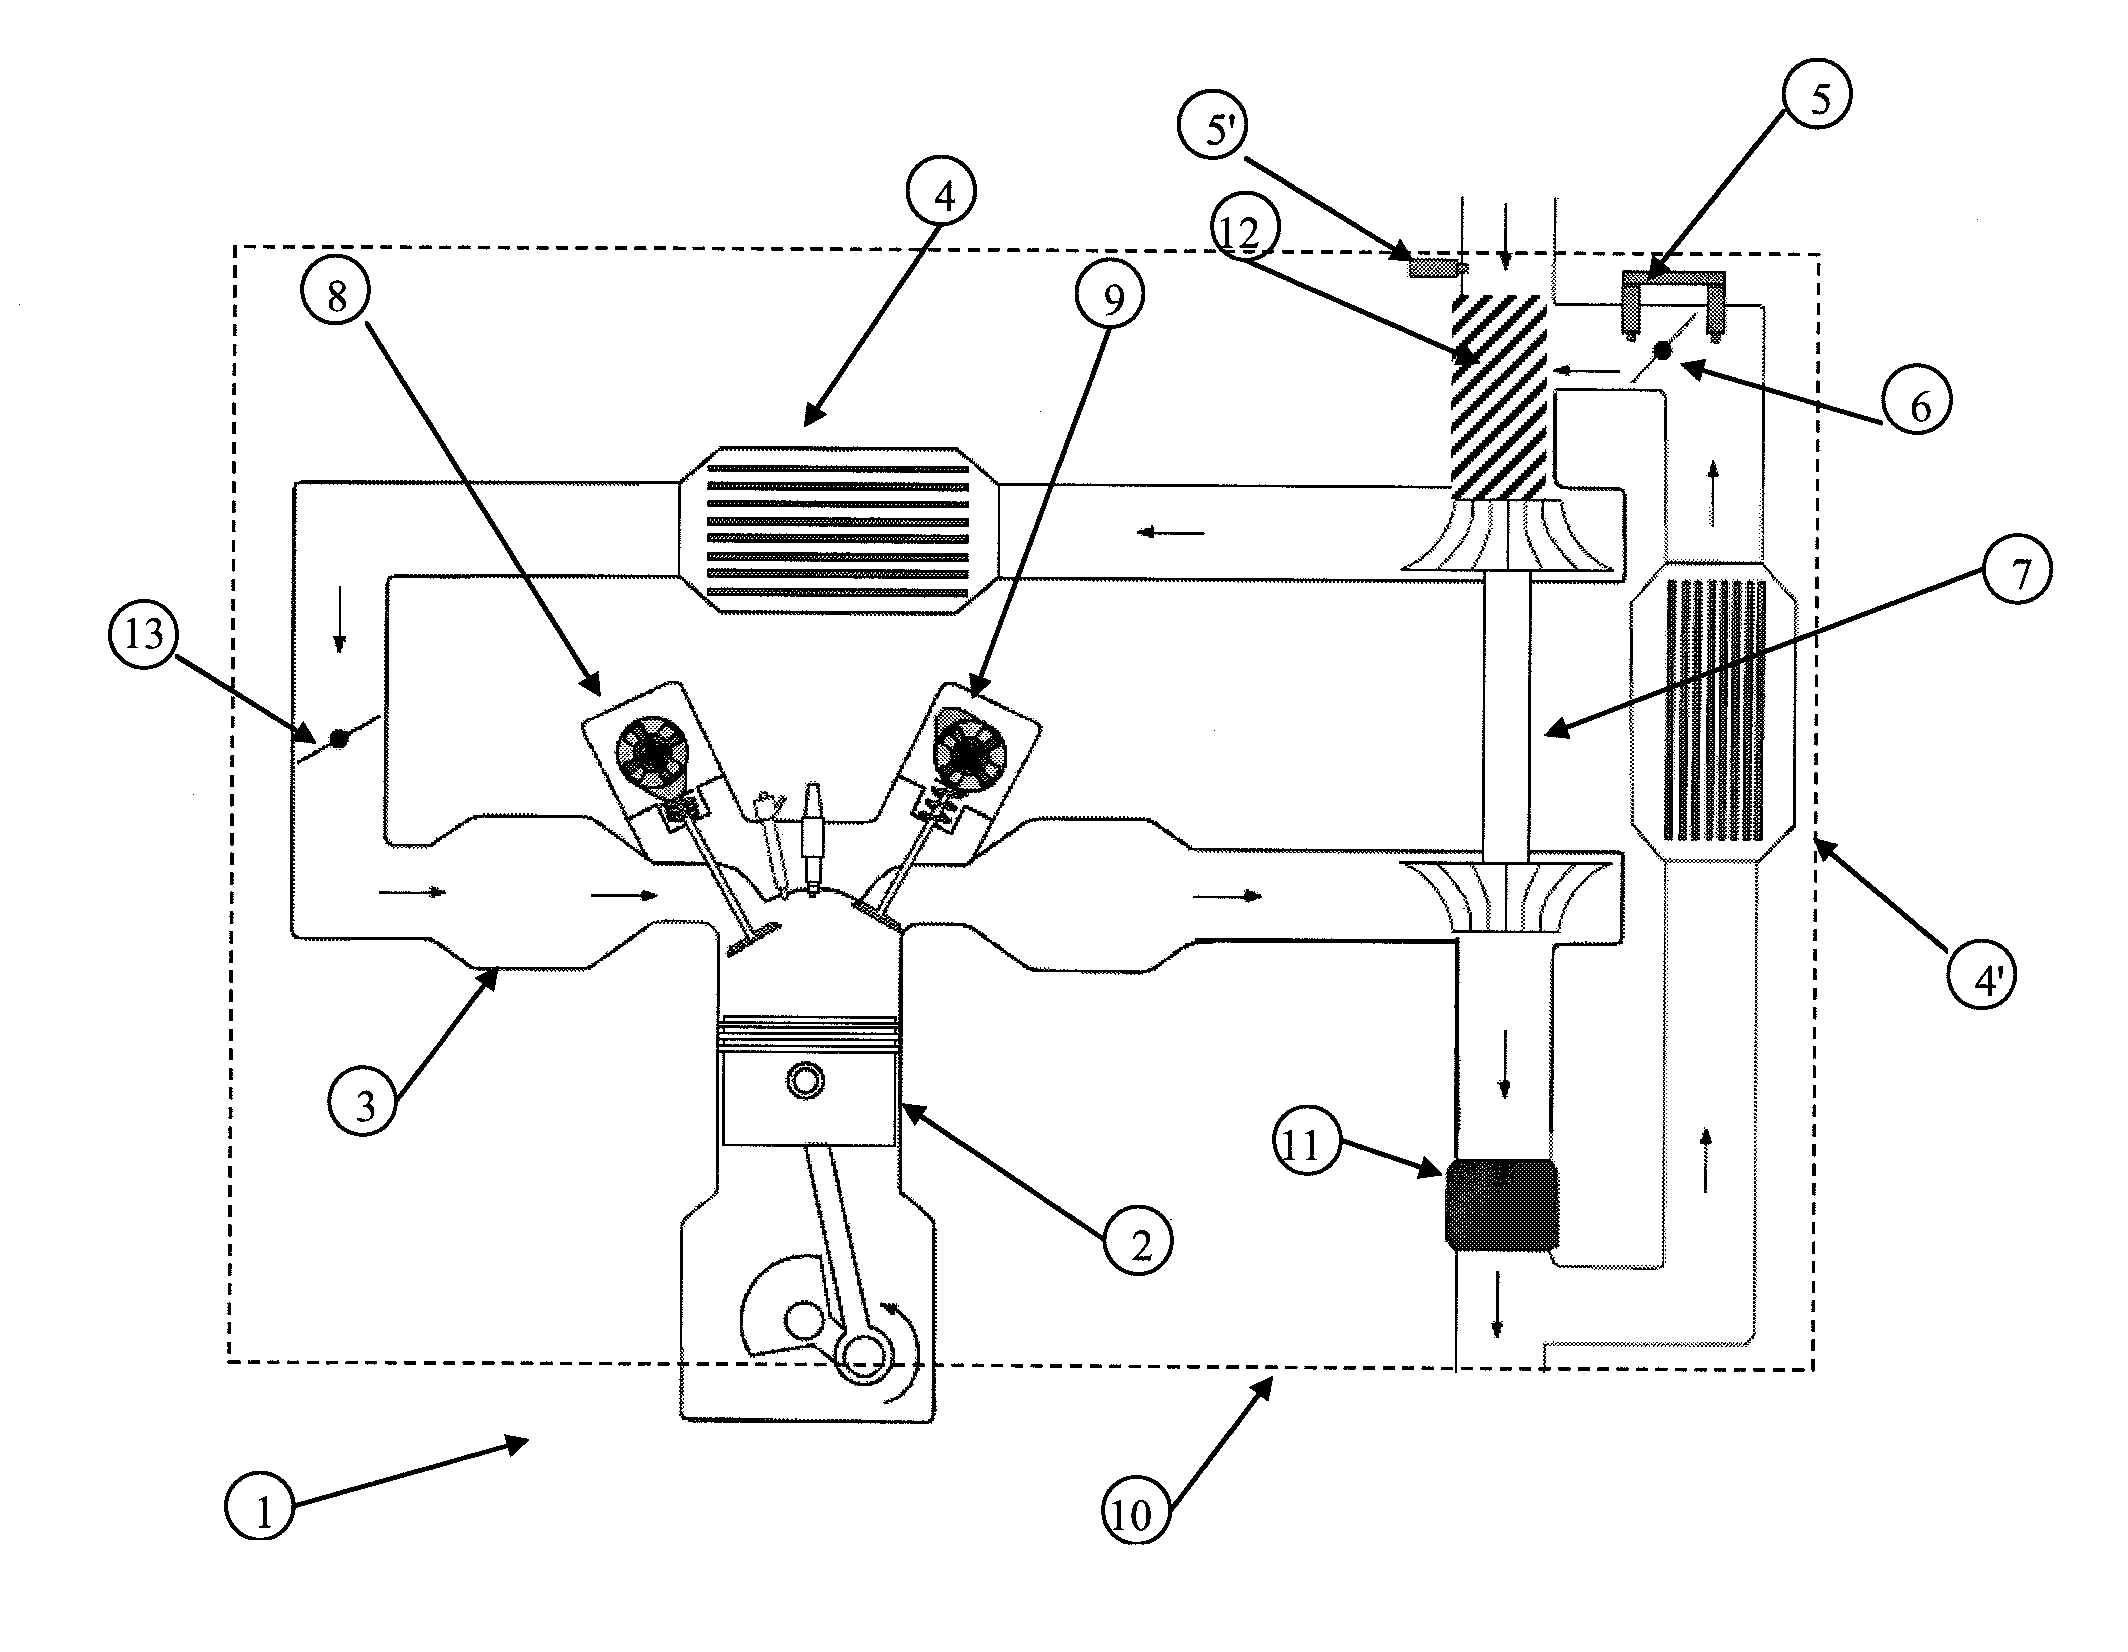 Method of controlling a combustion engine from estimation of the burnt gas mass fraction in the intake manifold